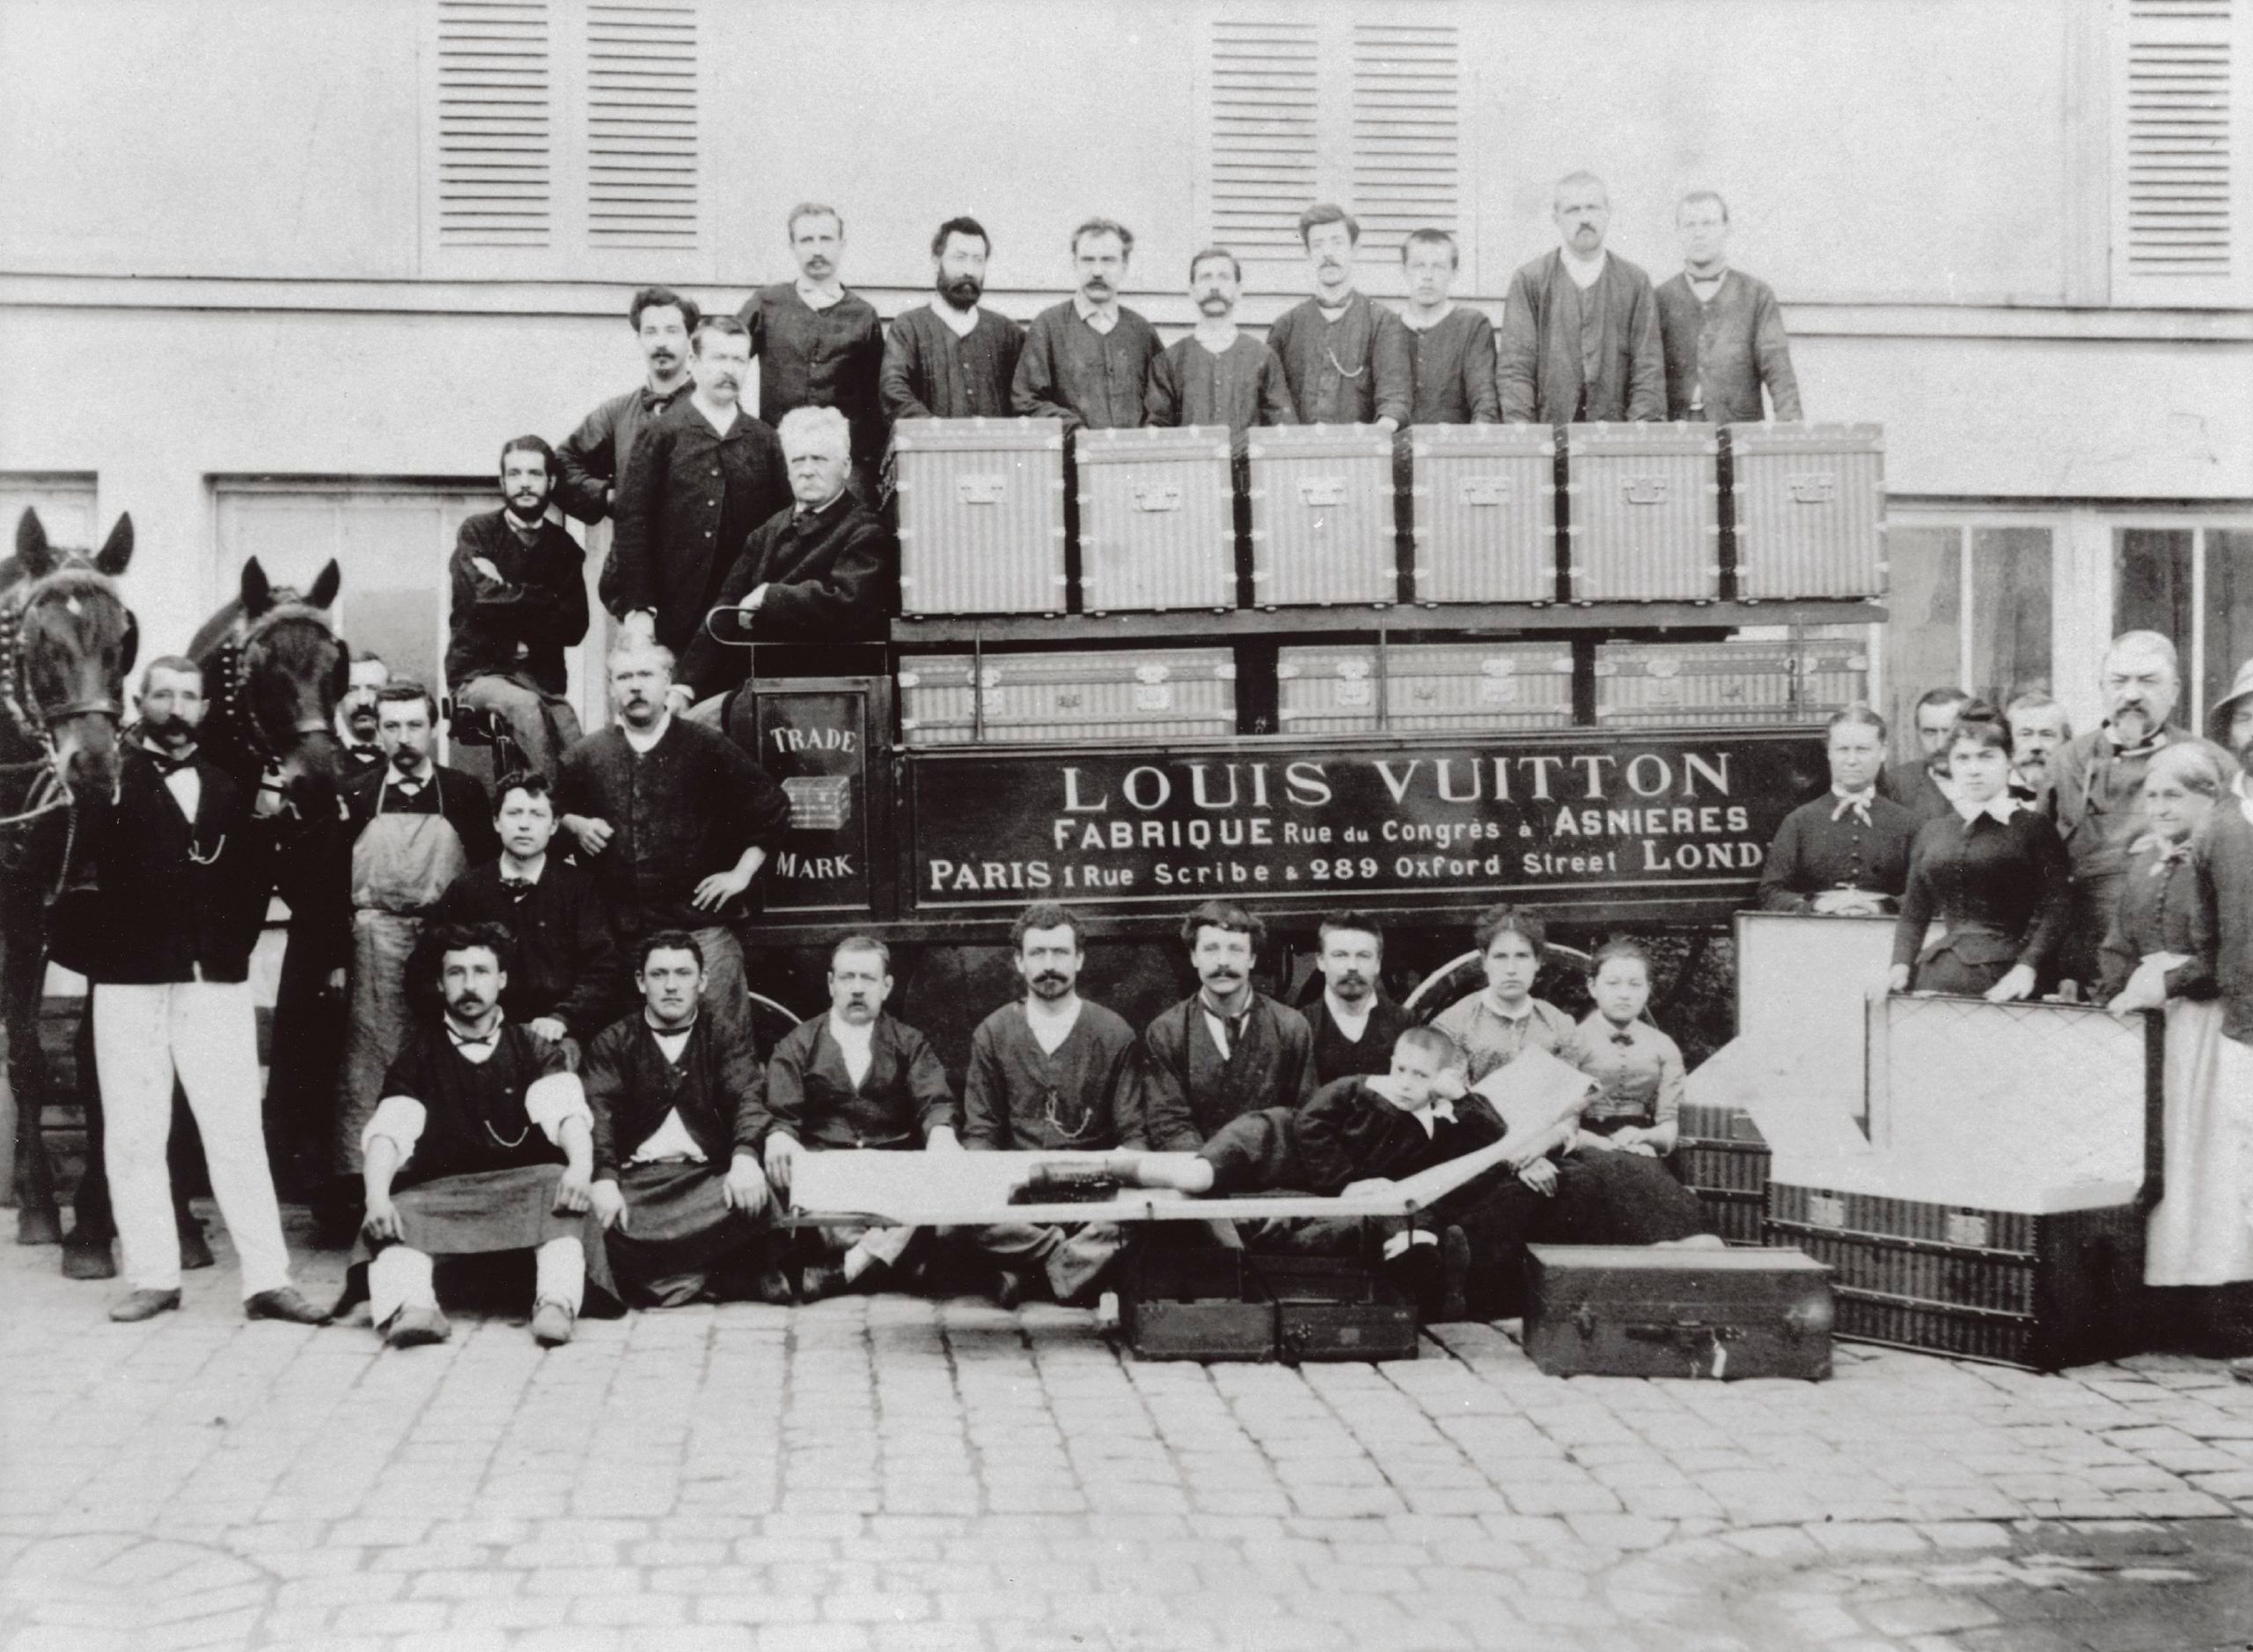 Samutaro on Instagram: “A Brief History of Louis Vuitton's Famous